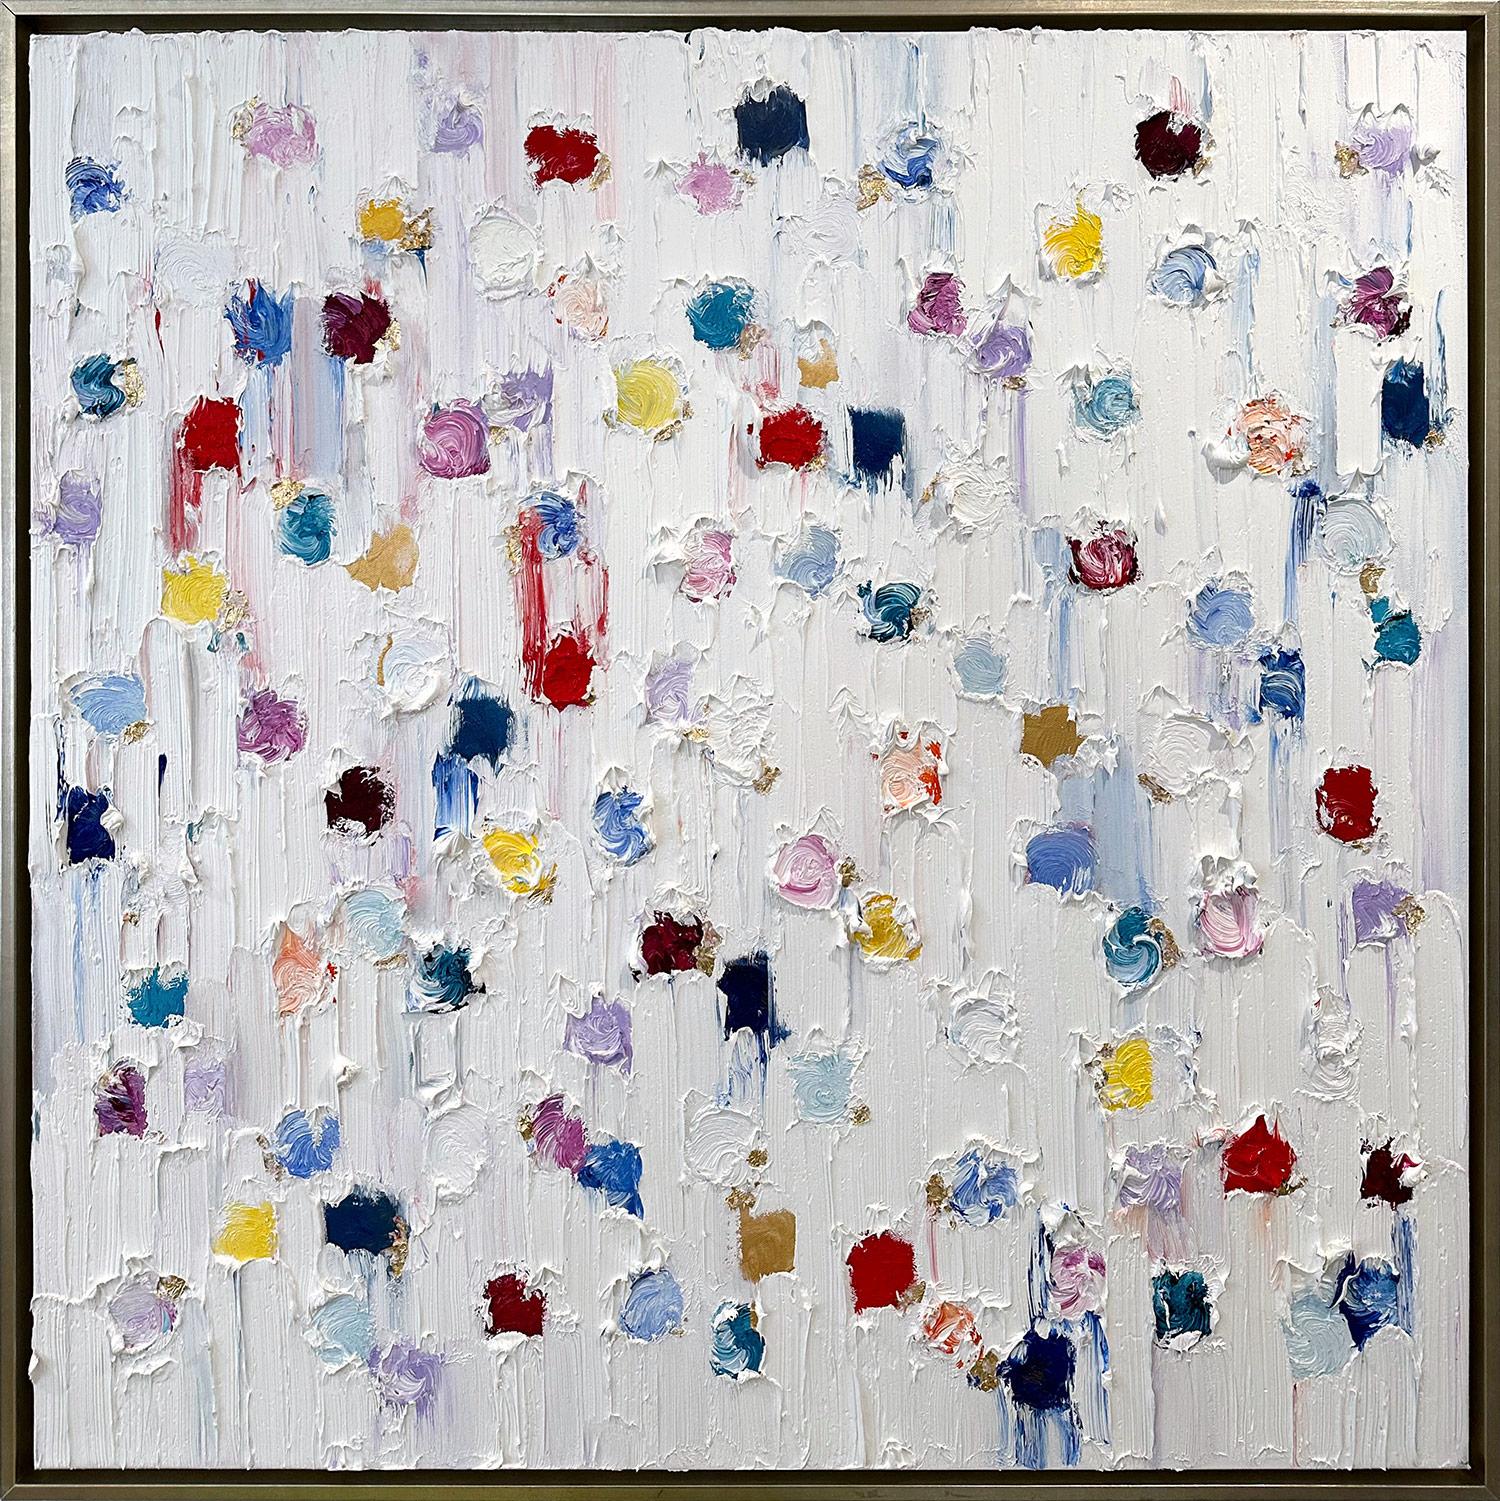 Cindy Shaoul Abstract Painting - "Dripping Dots - Cannes" Multicolor Contemporary Oil Painting on Canvas Framed